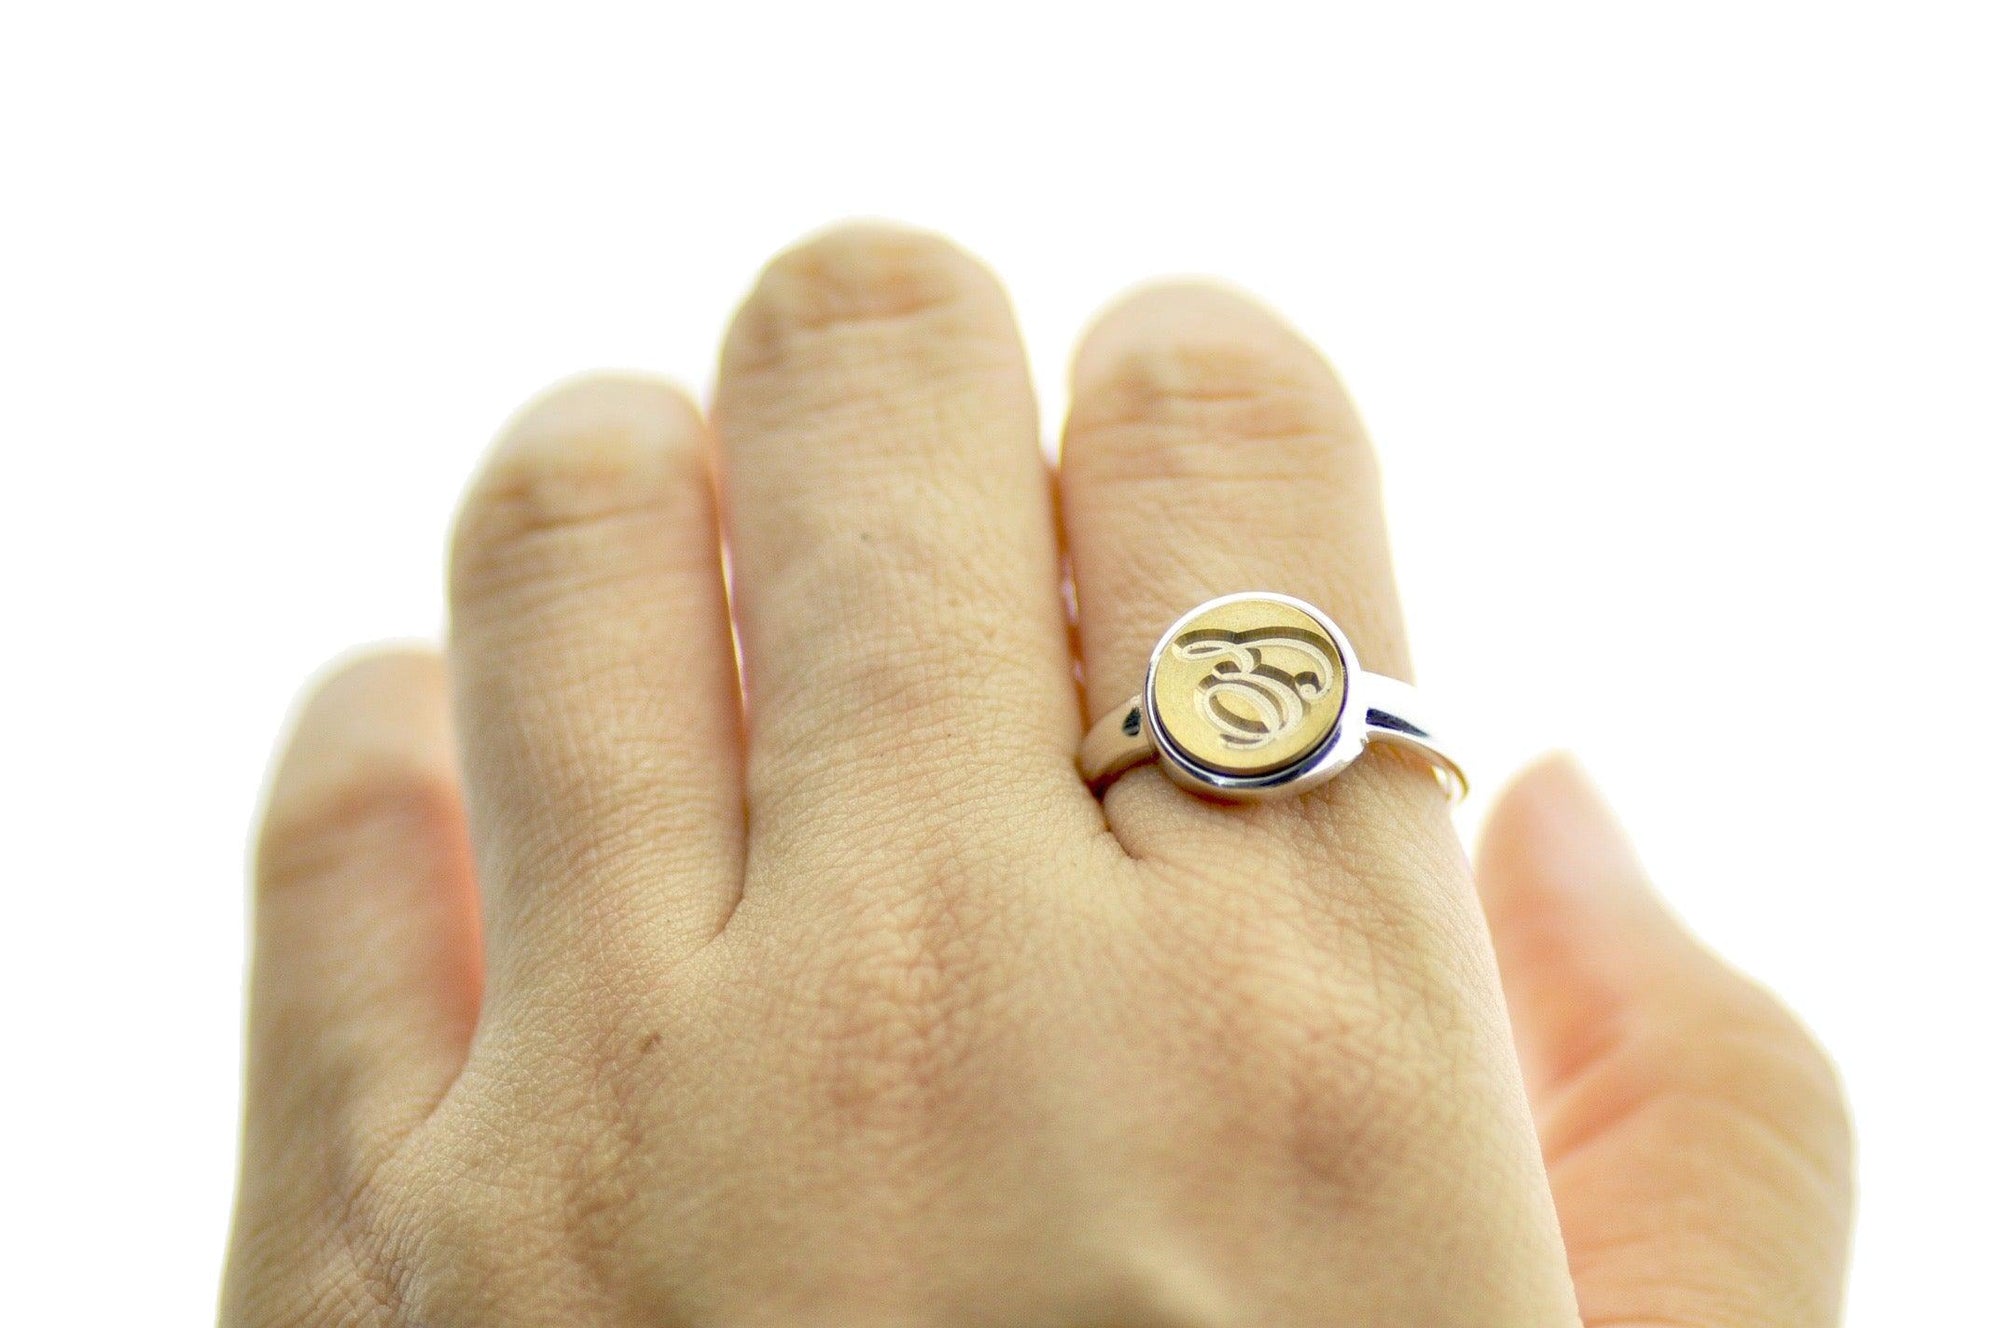 Script Initial Signet Ring - Backtozero B20 - 1 initial, 10m, 10mm, 10mm ring, 10mn, 1initial, accessory, Custom, custom ring, her, Initial, initial ring, jewelry, Lavender, minimal, Personalized, ring, seal, seal ring, signet ring, simple, size 10, size 6, size 7, size 8, size 9, wax seal, wax seal ring, wax seal stamp